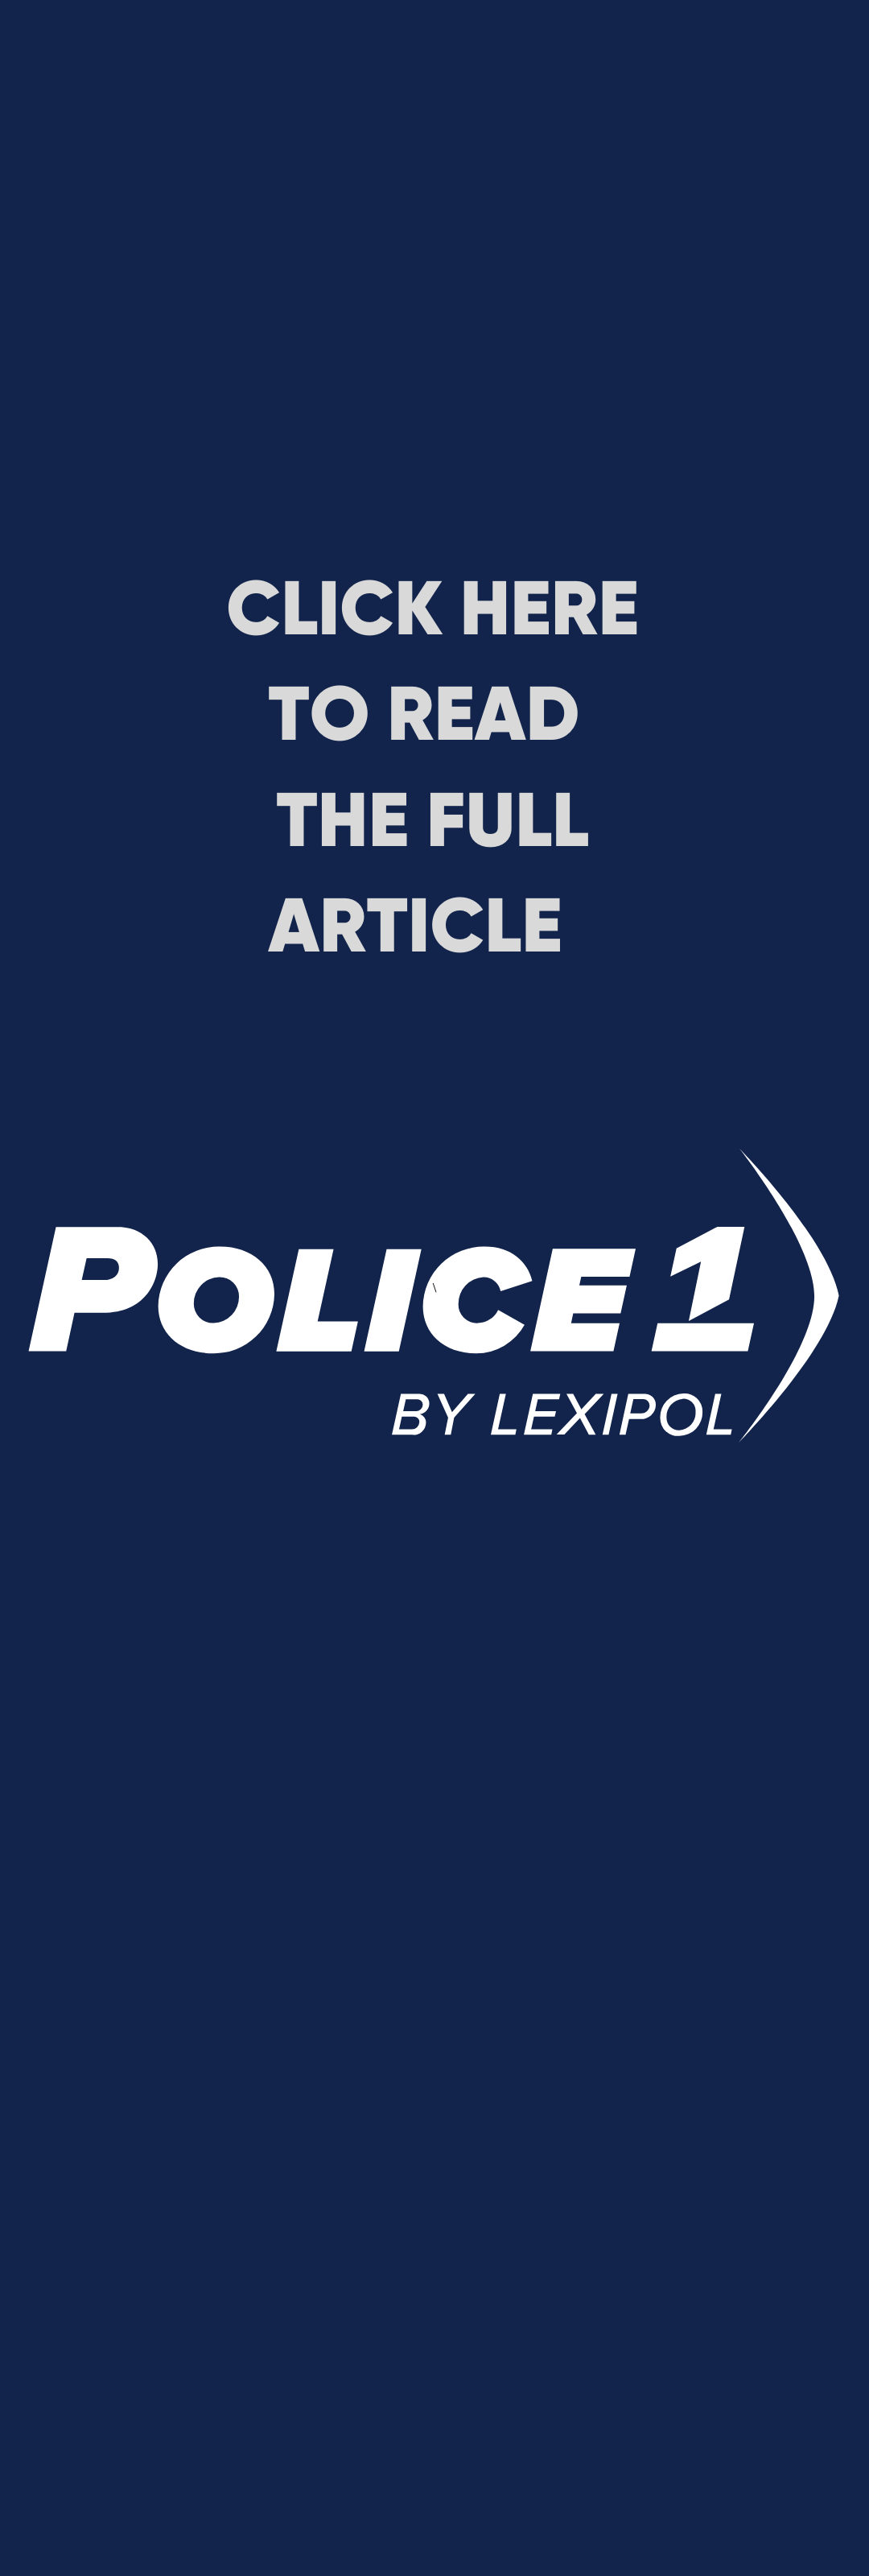 Click here to read the full article on Police1